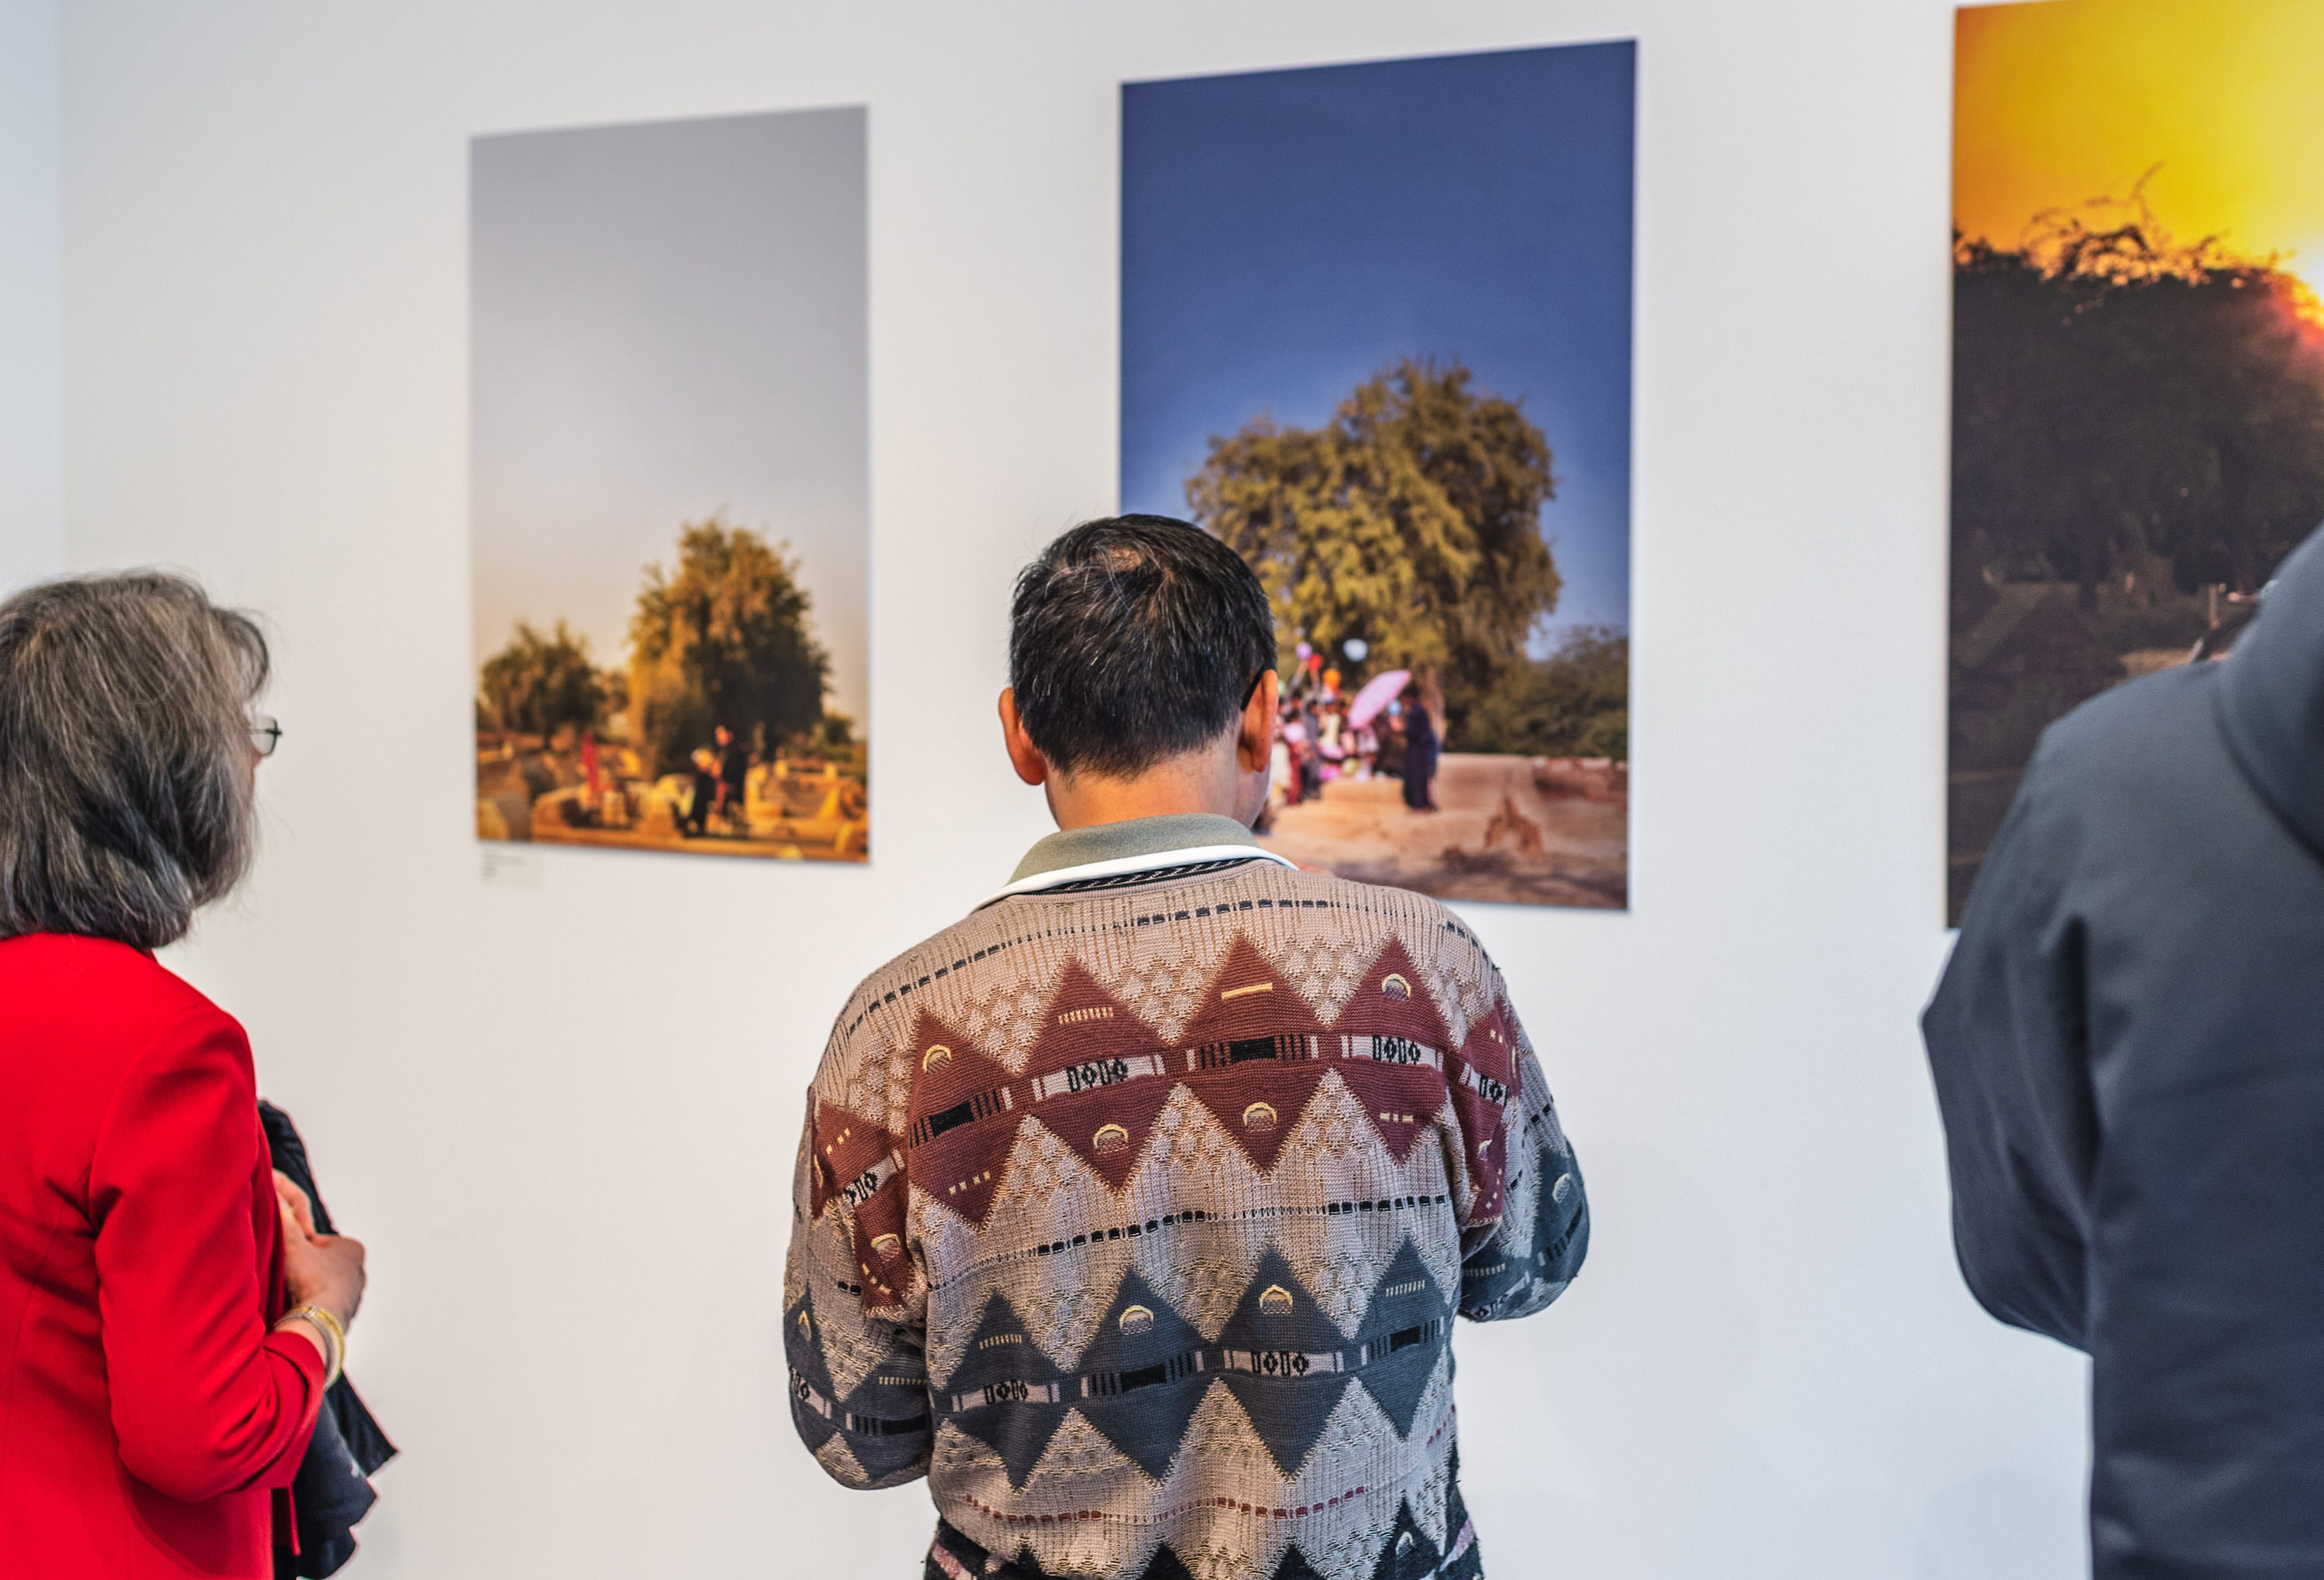 Guests observe the Mittal Institute’s Spring 2019 Visiting Artist Fellows’ work at a gallery exhibition.